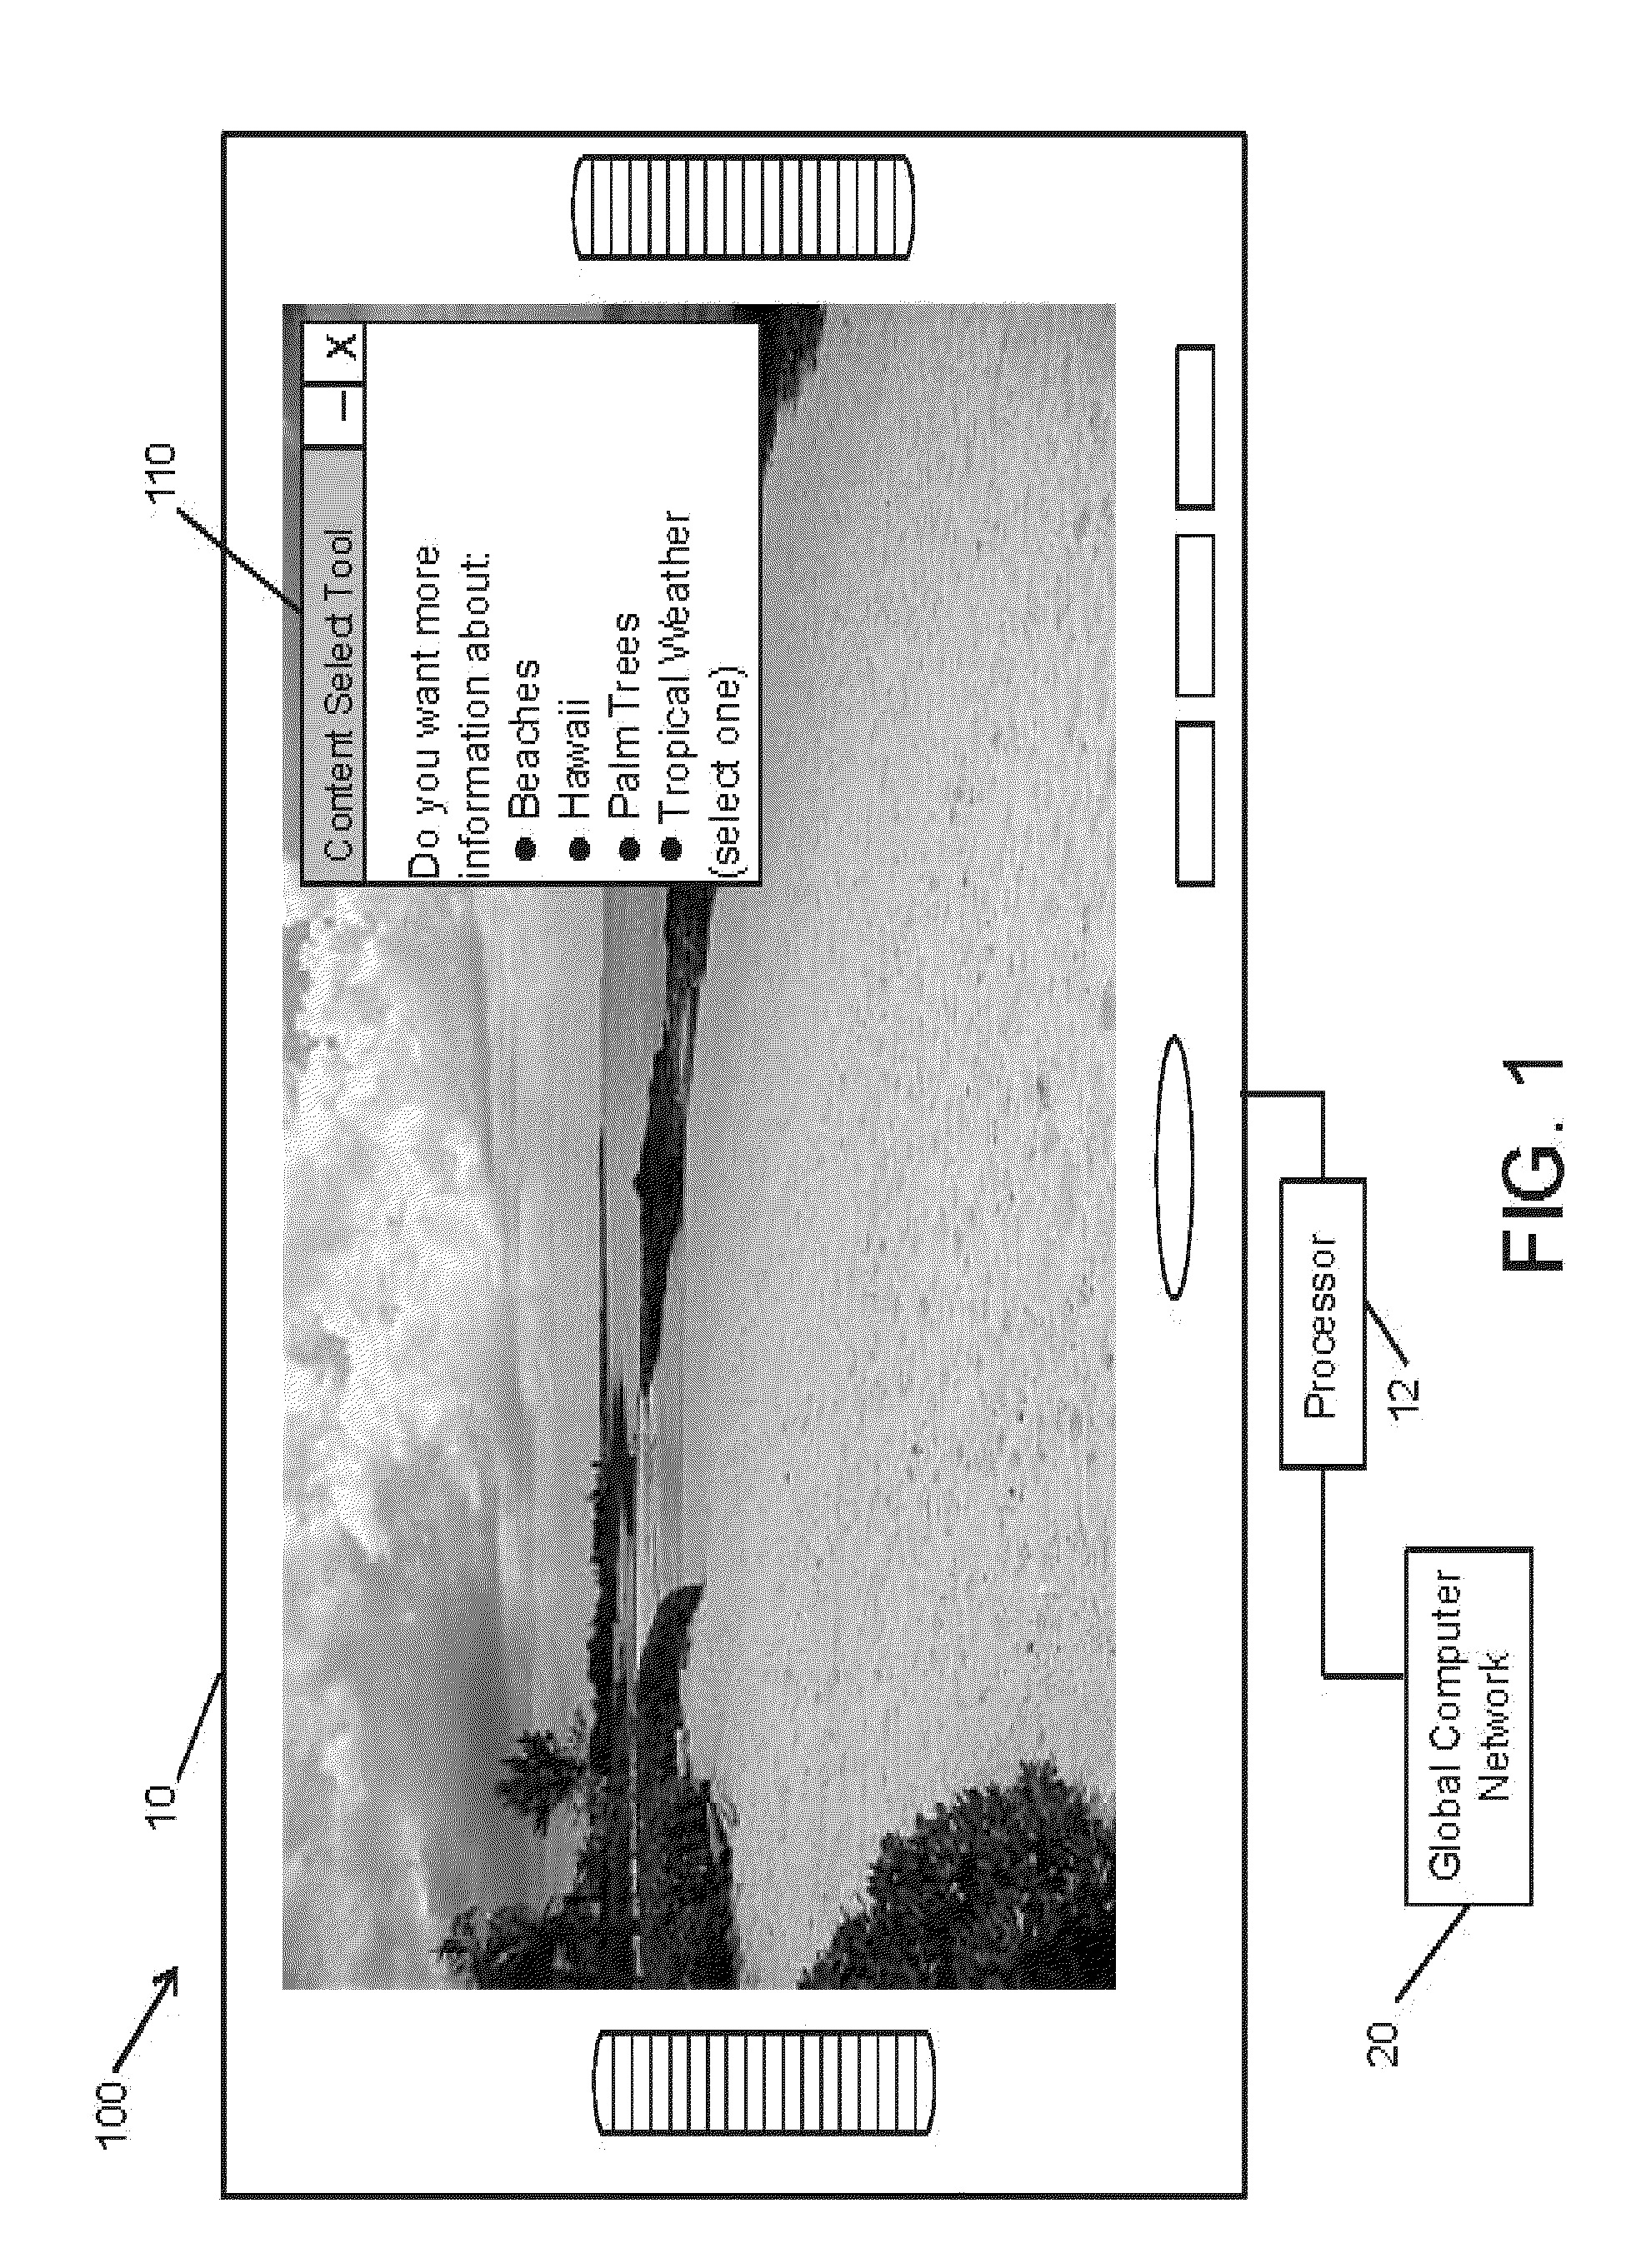 Methods for identifying video segments and displaying contextual targeted content on a connected television